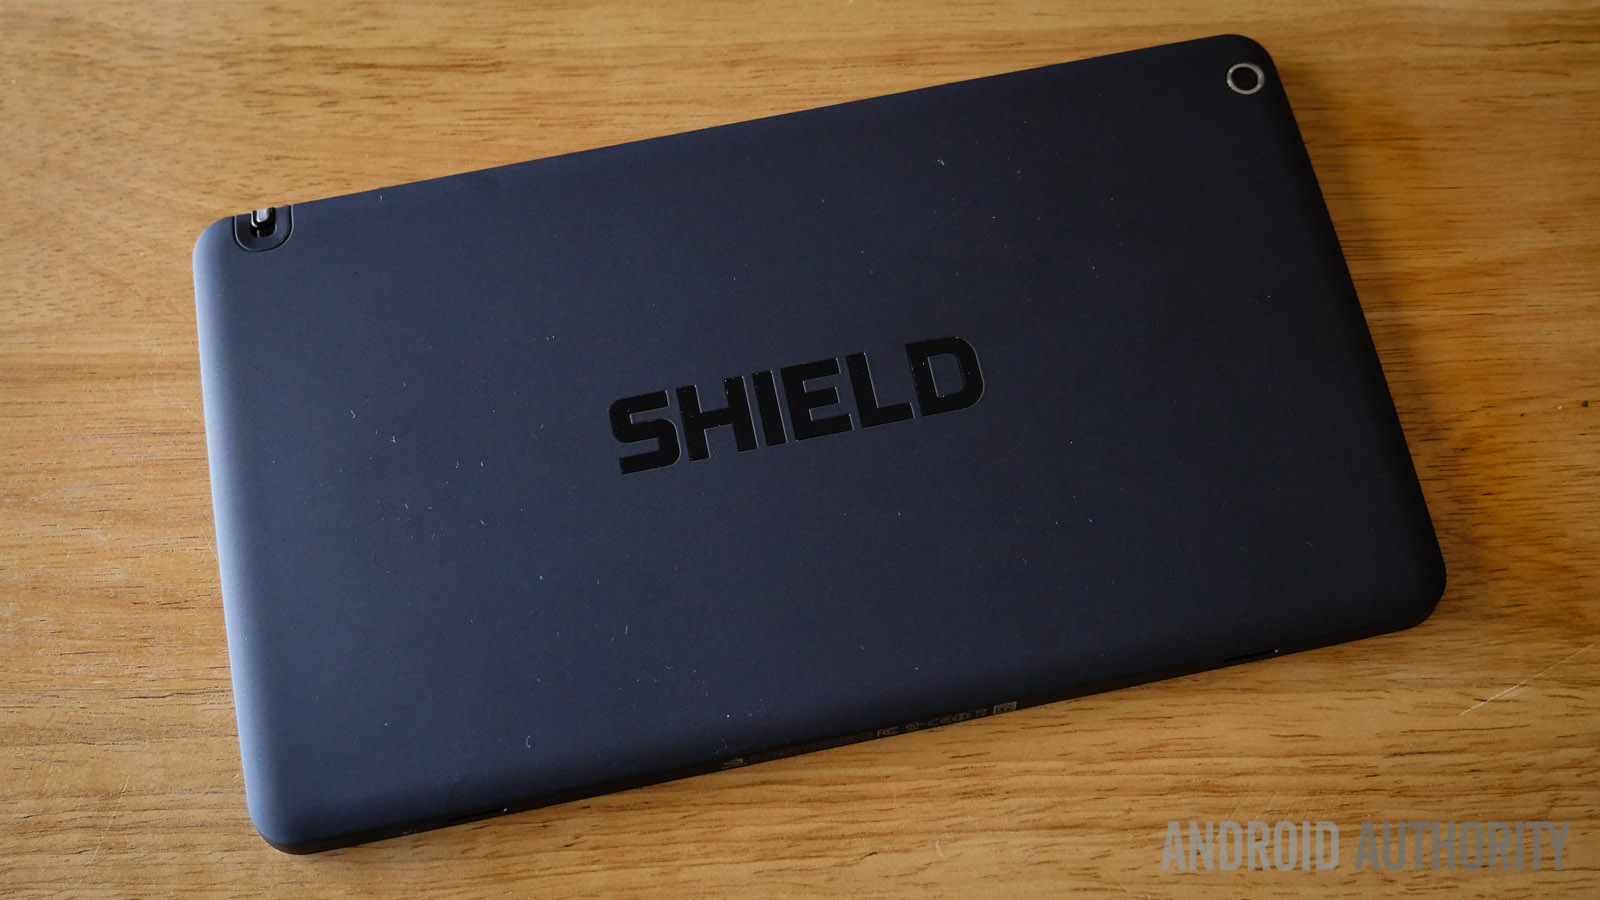 nvidia shield tablet first impressions (2 of 9)